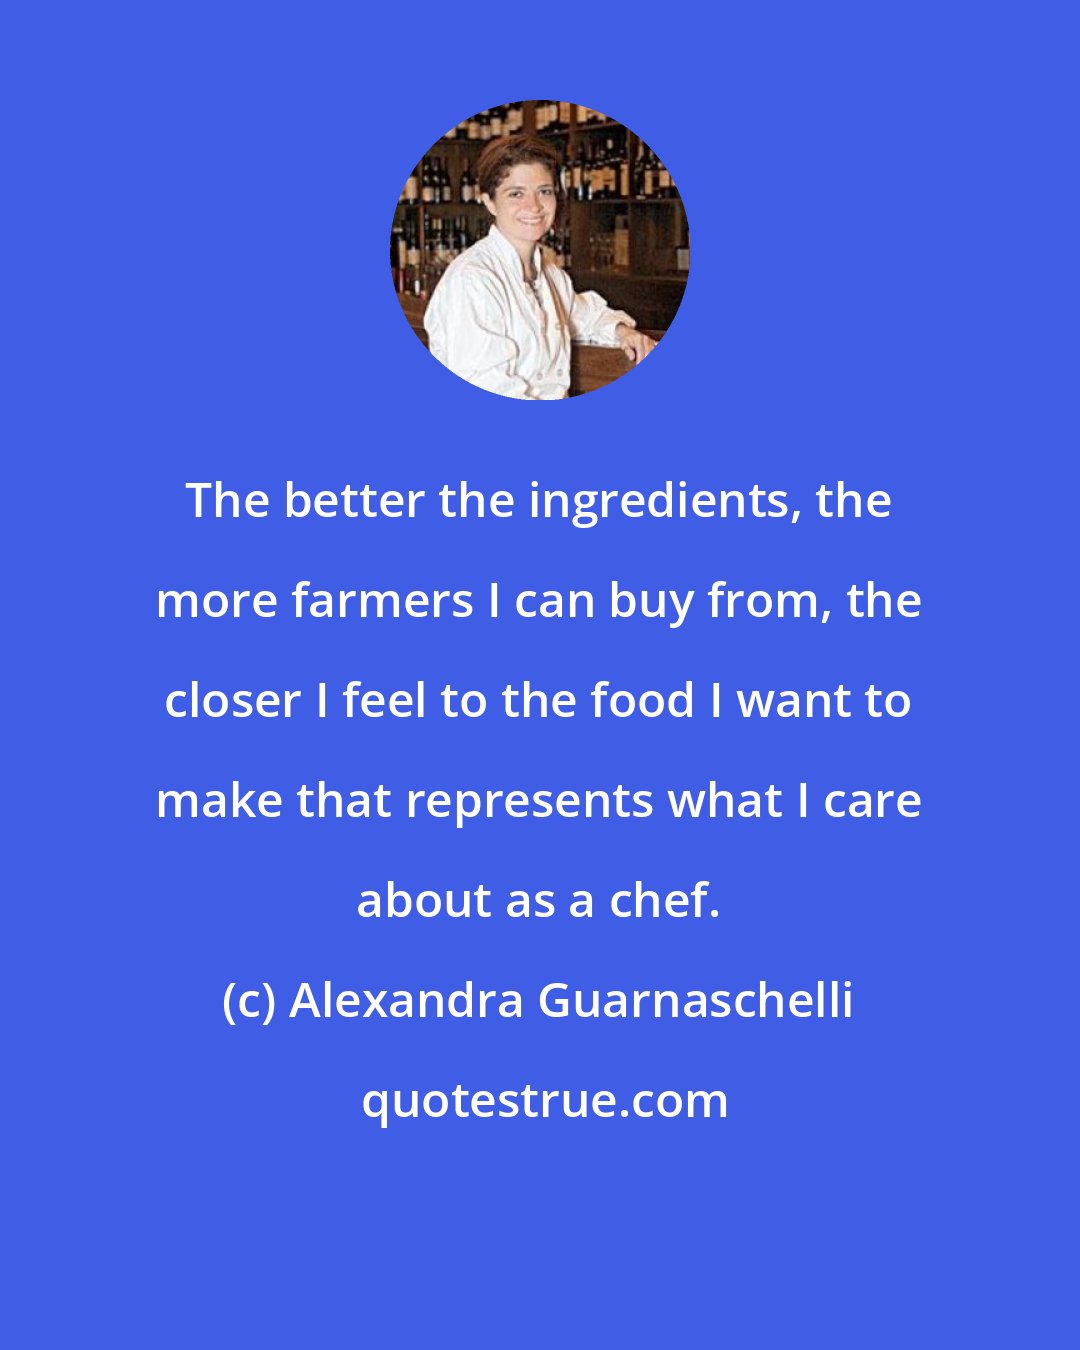 Alexandra Guarnaschelli: The better the ingredients, the more farmers I can buy from, the closer I feel to the food I want to make that represents what I care about as a chef.